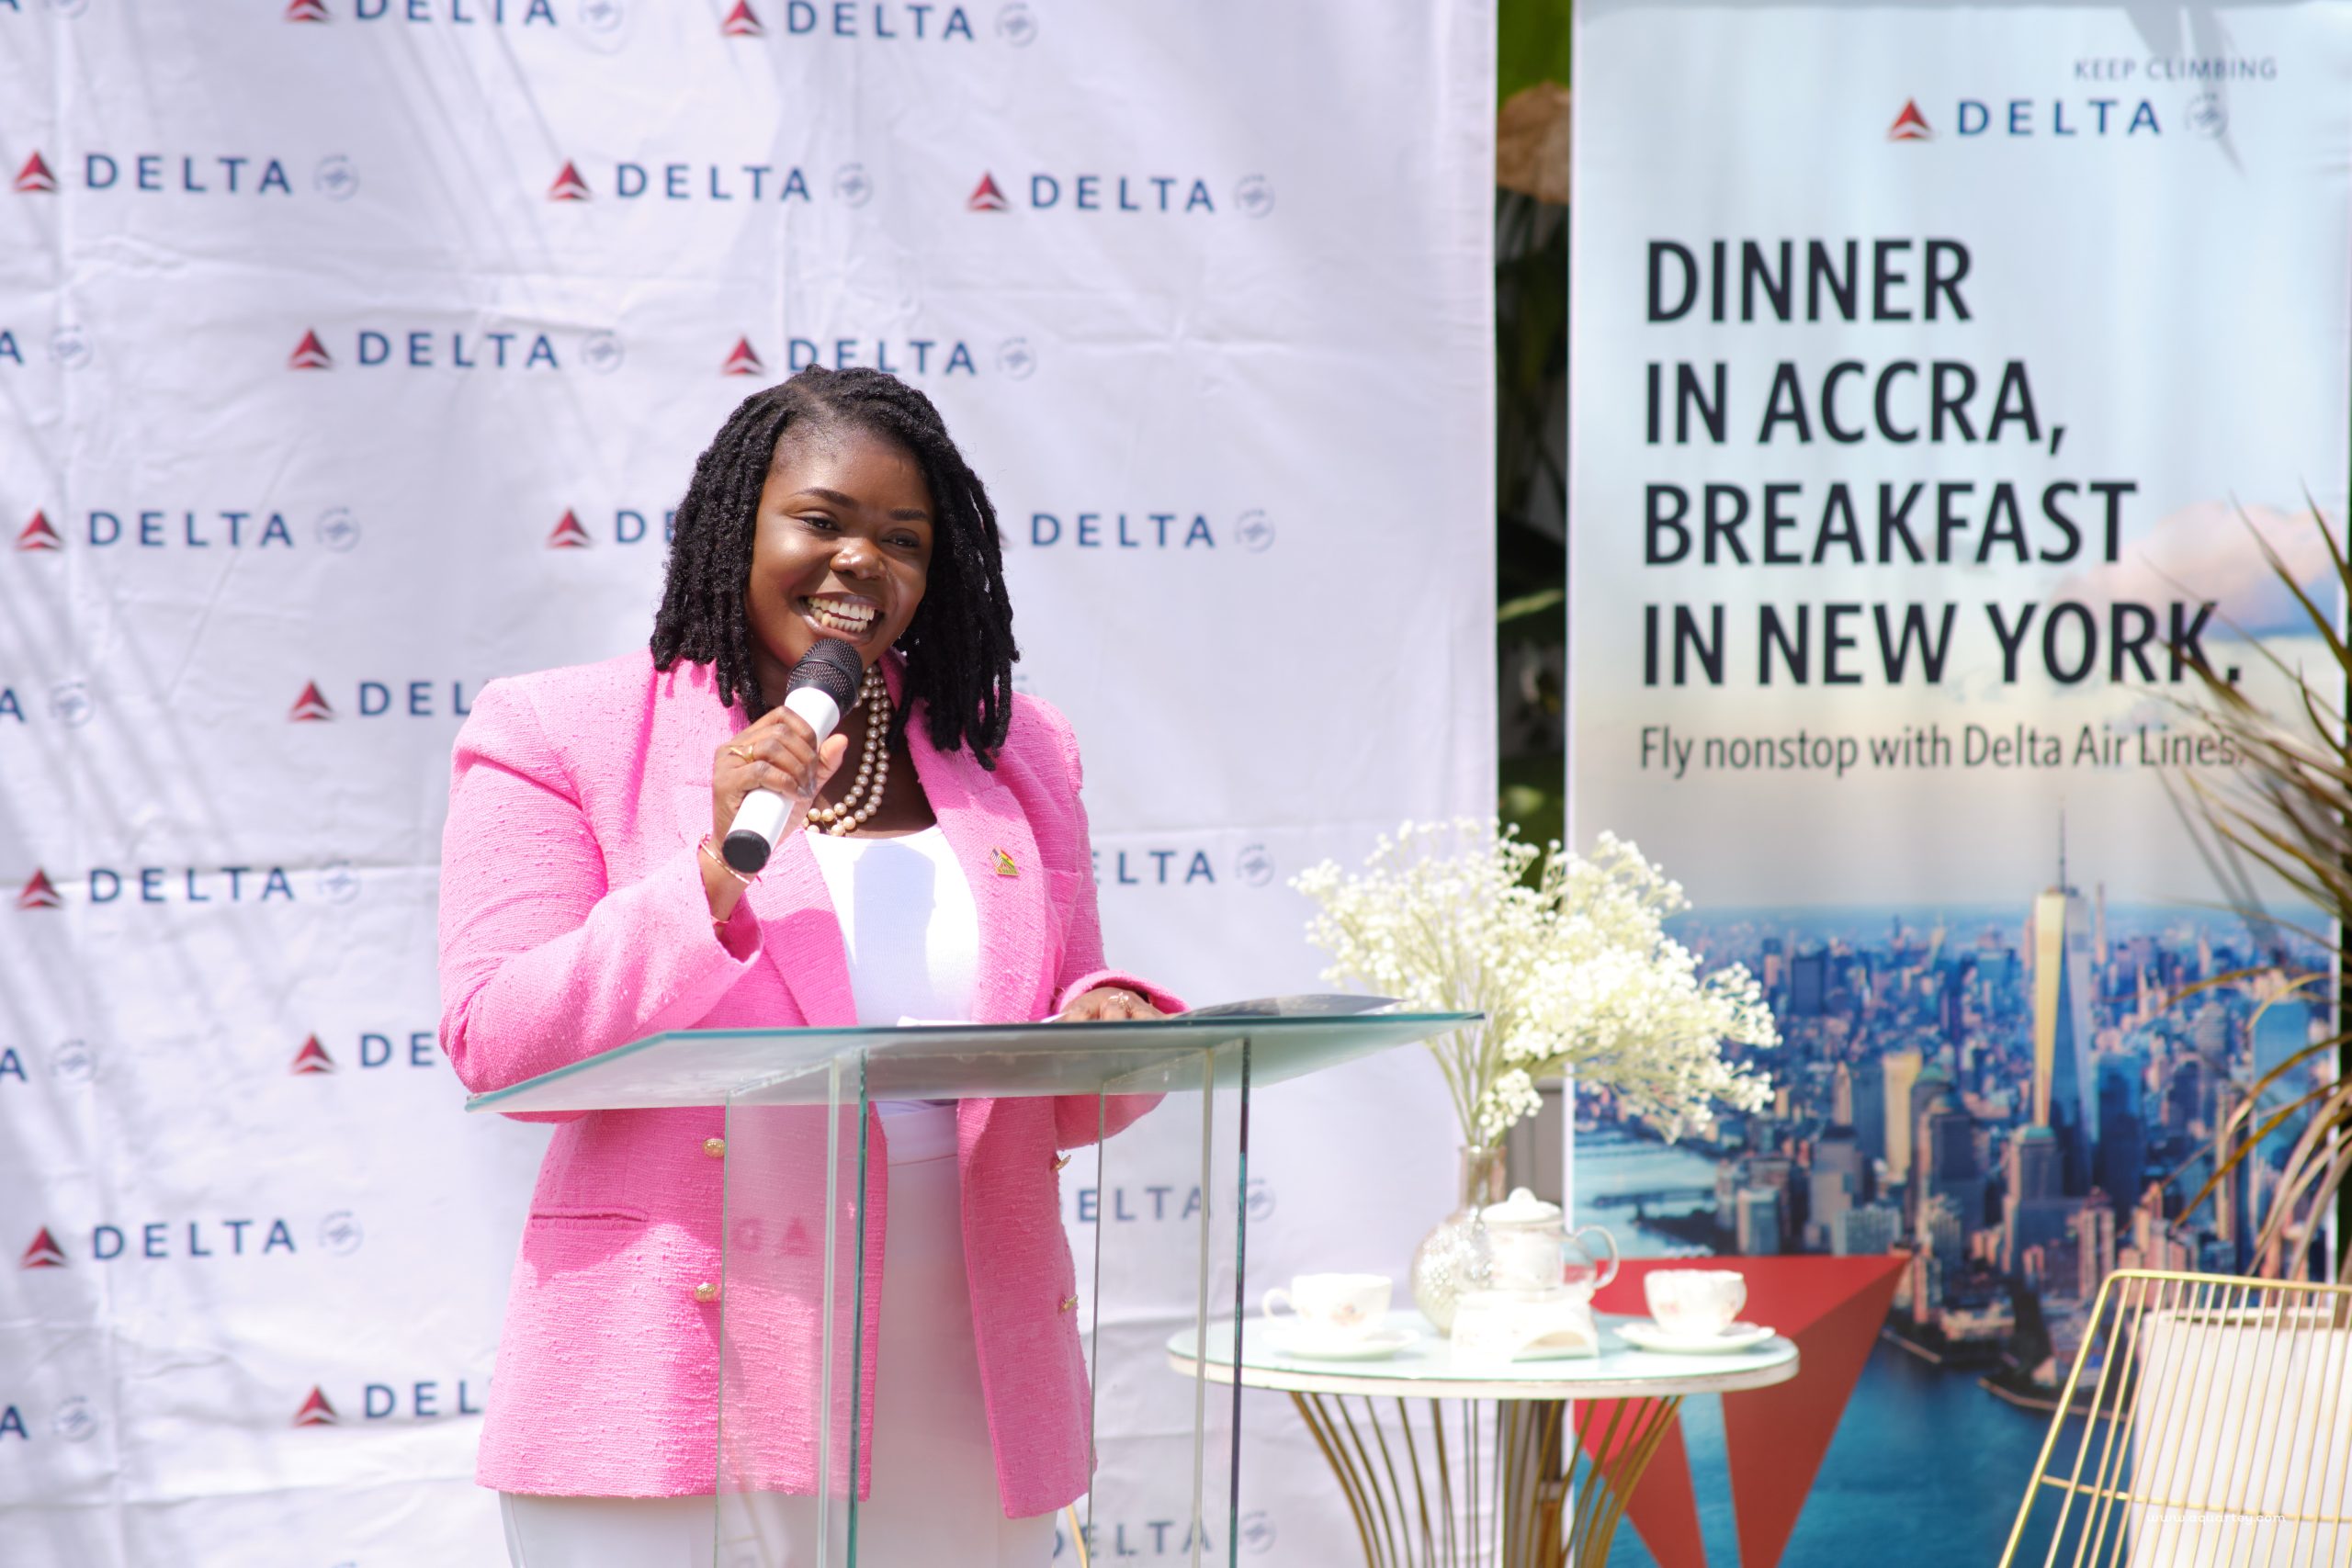 Delta Air Lines celebrates women in aviation industry